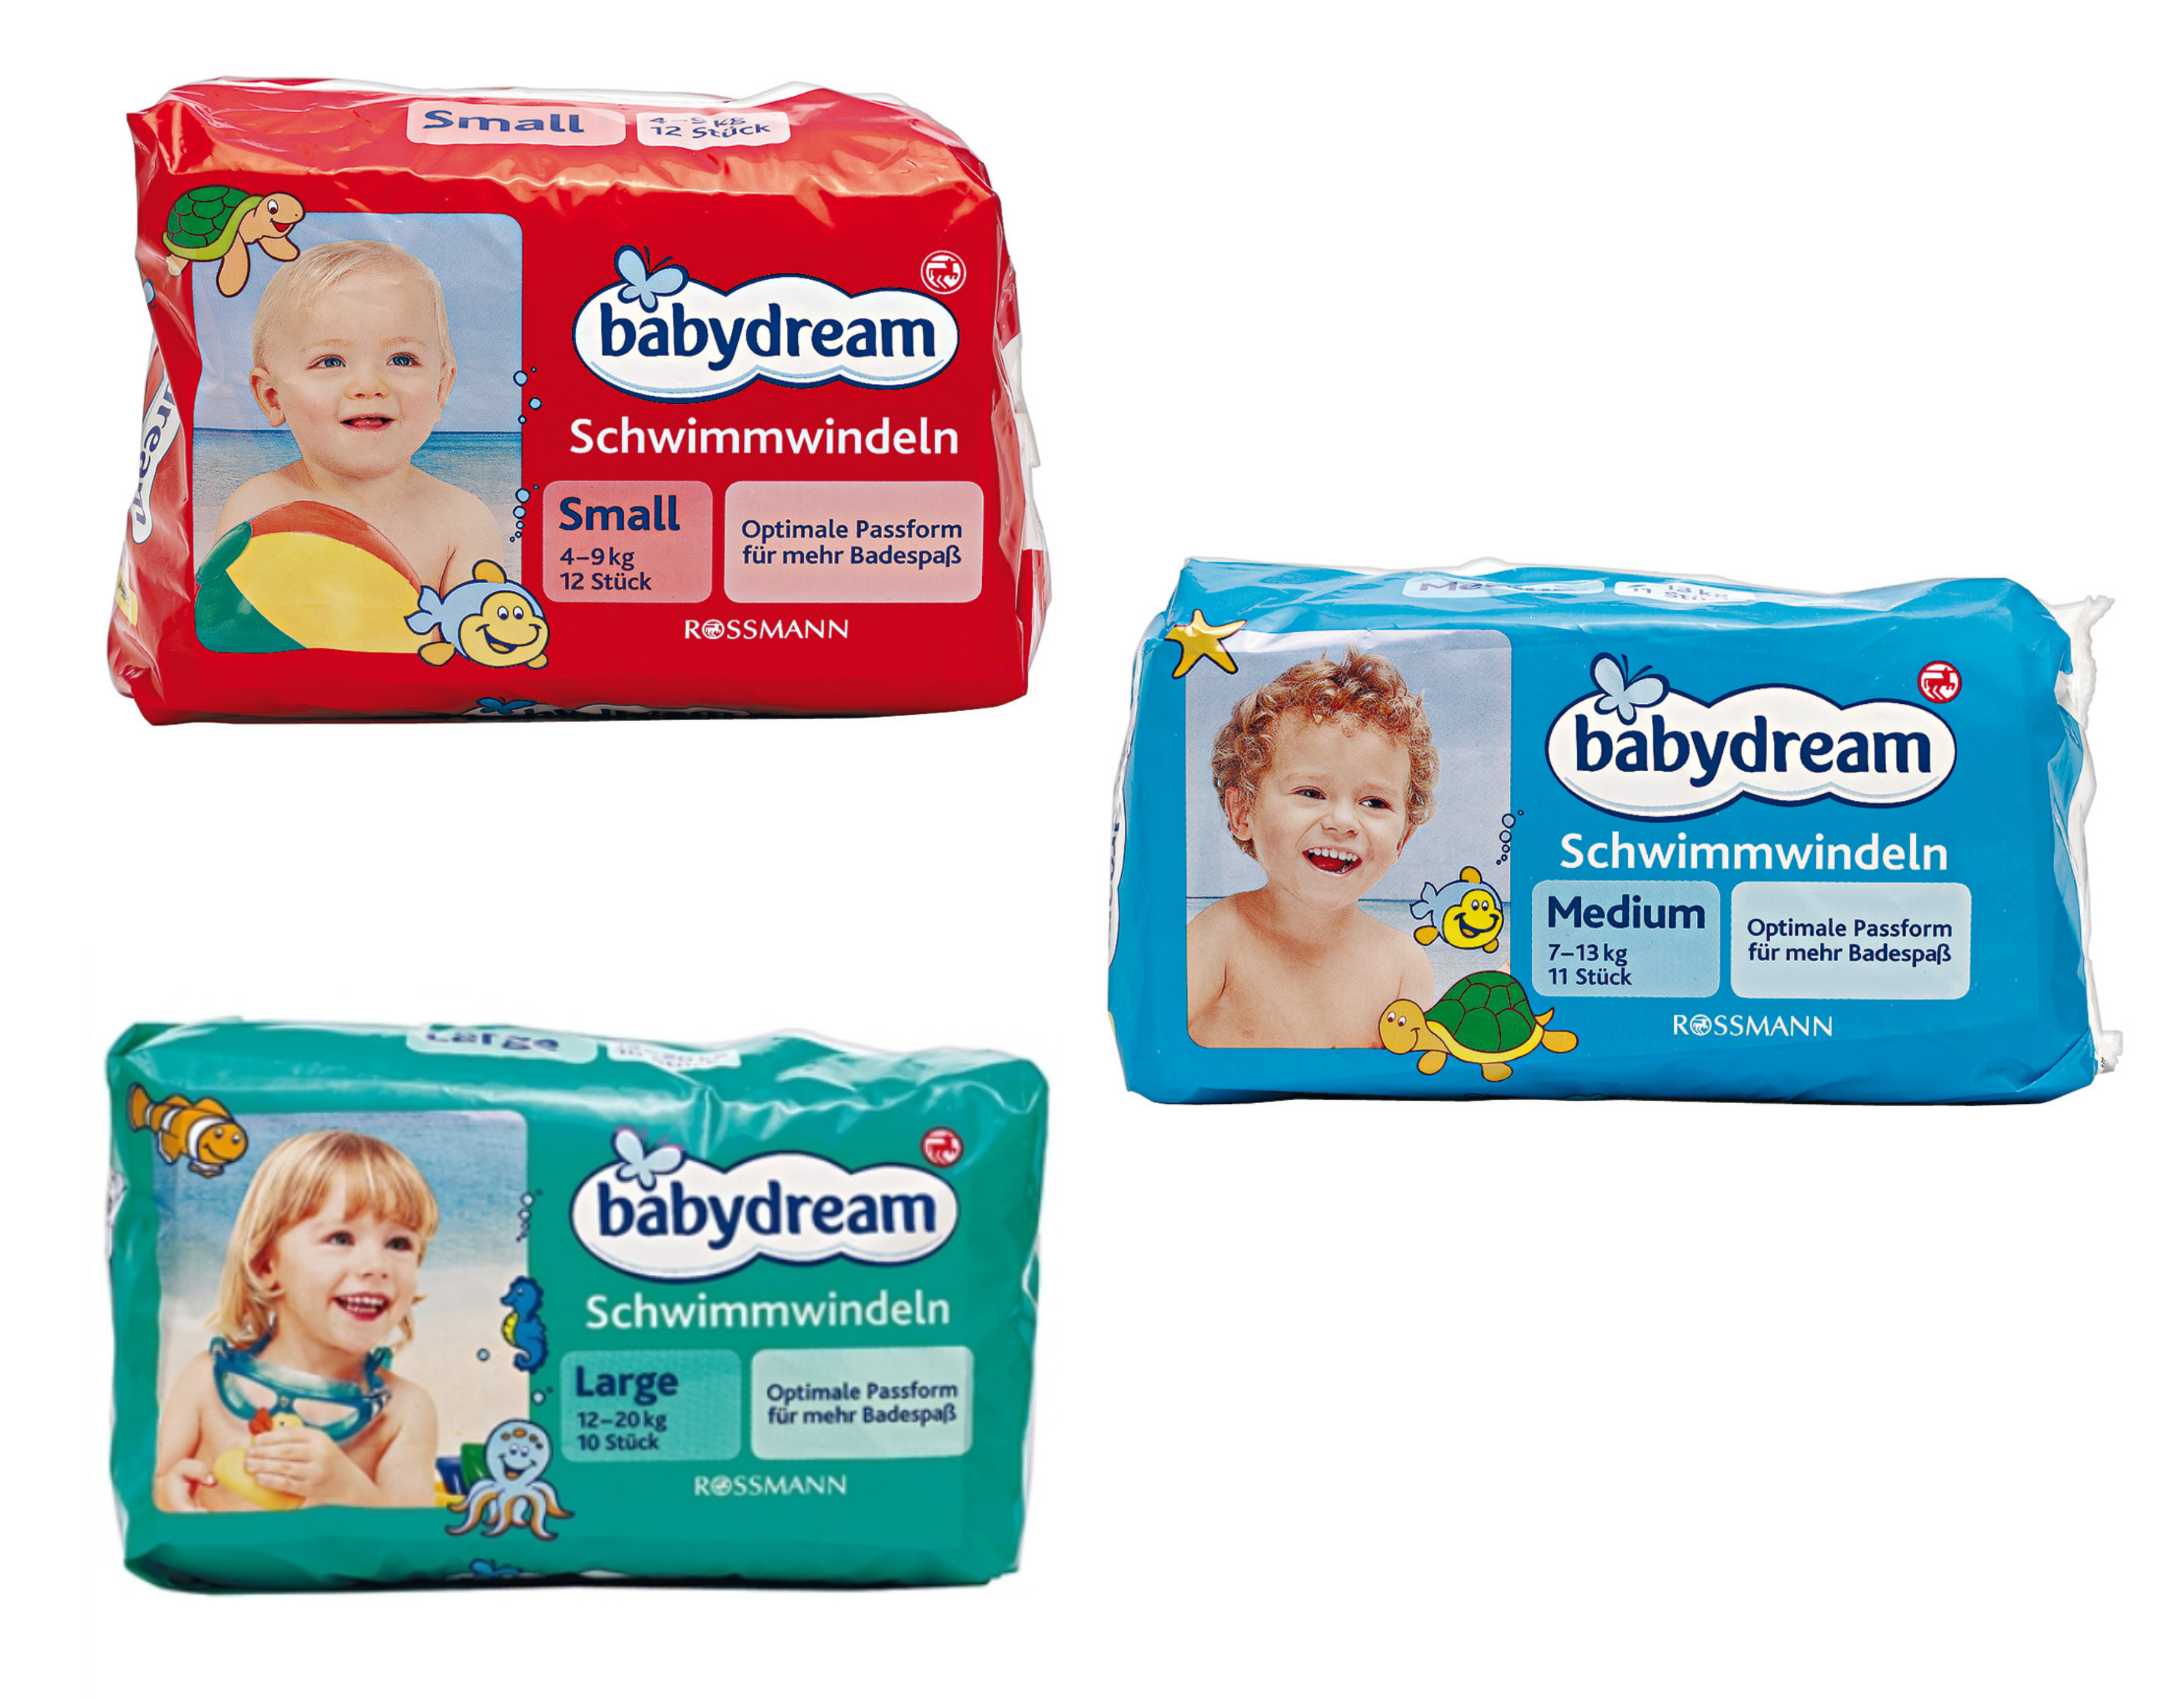 pampers active baby цена украина